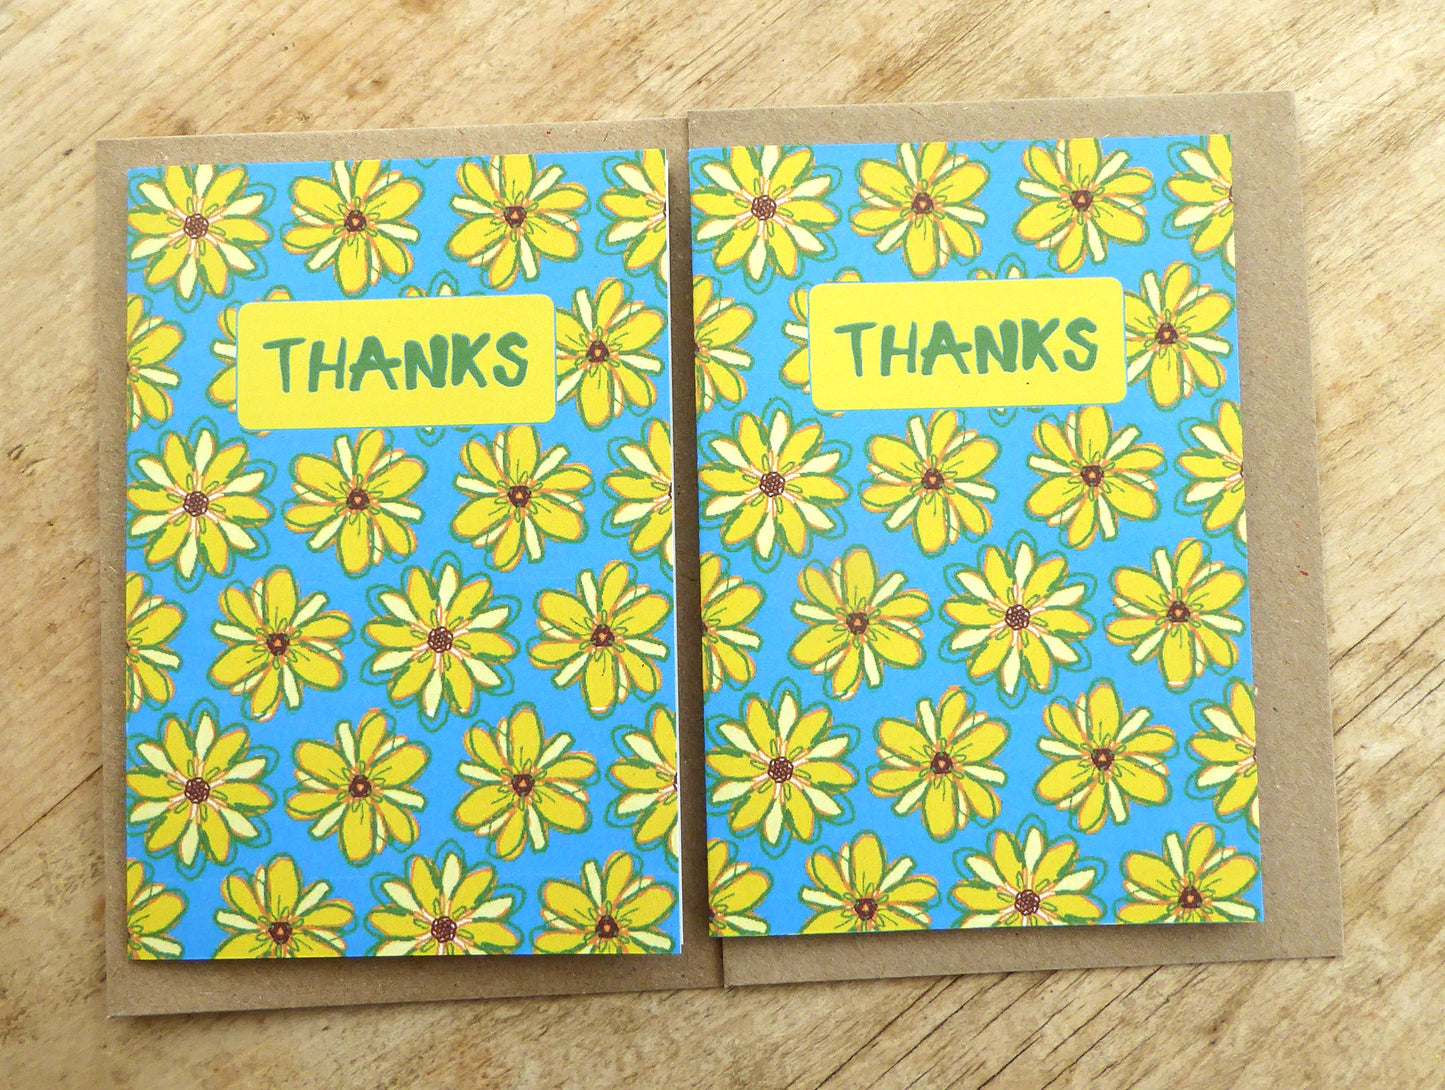 Thanks  - Pack of two Thank you Cards  - reproduction of original Artwork - Recycled - Handmade - by Norfolk based artist Debbie Osborn